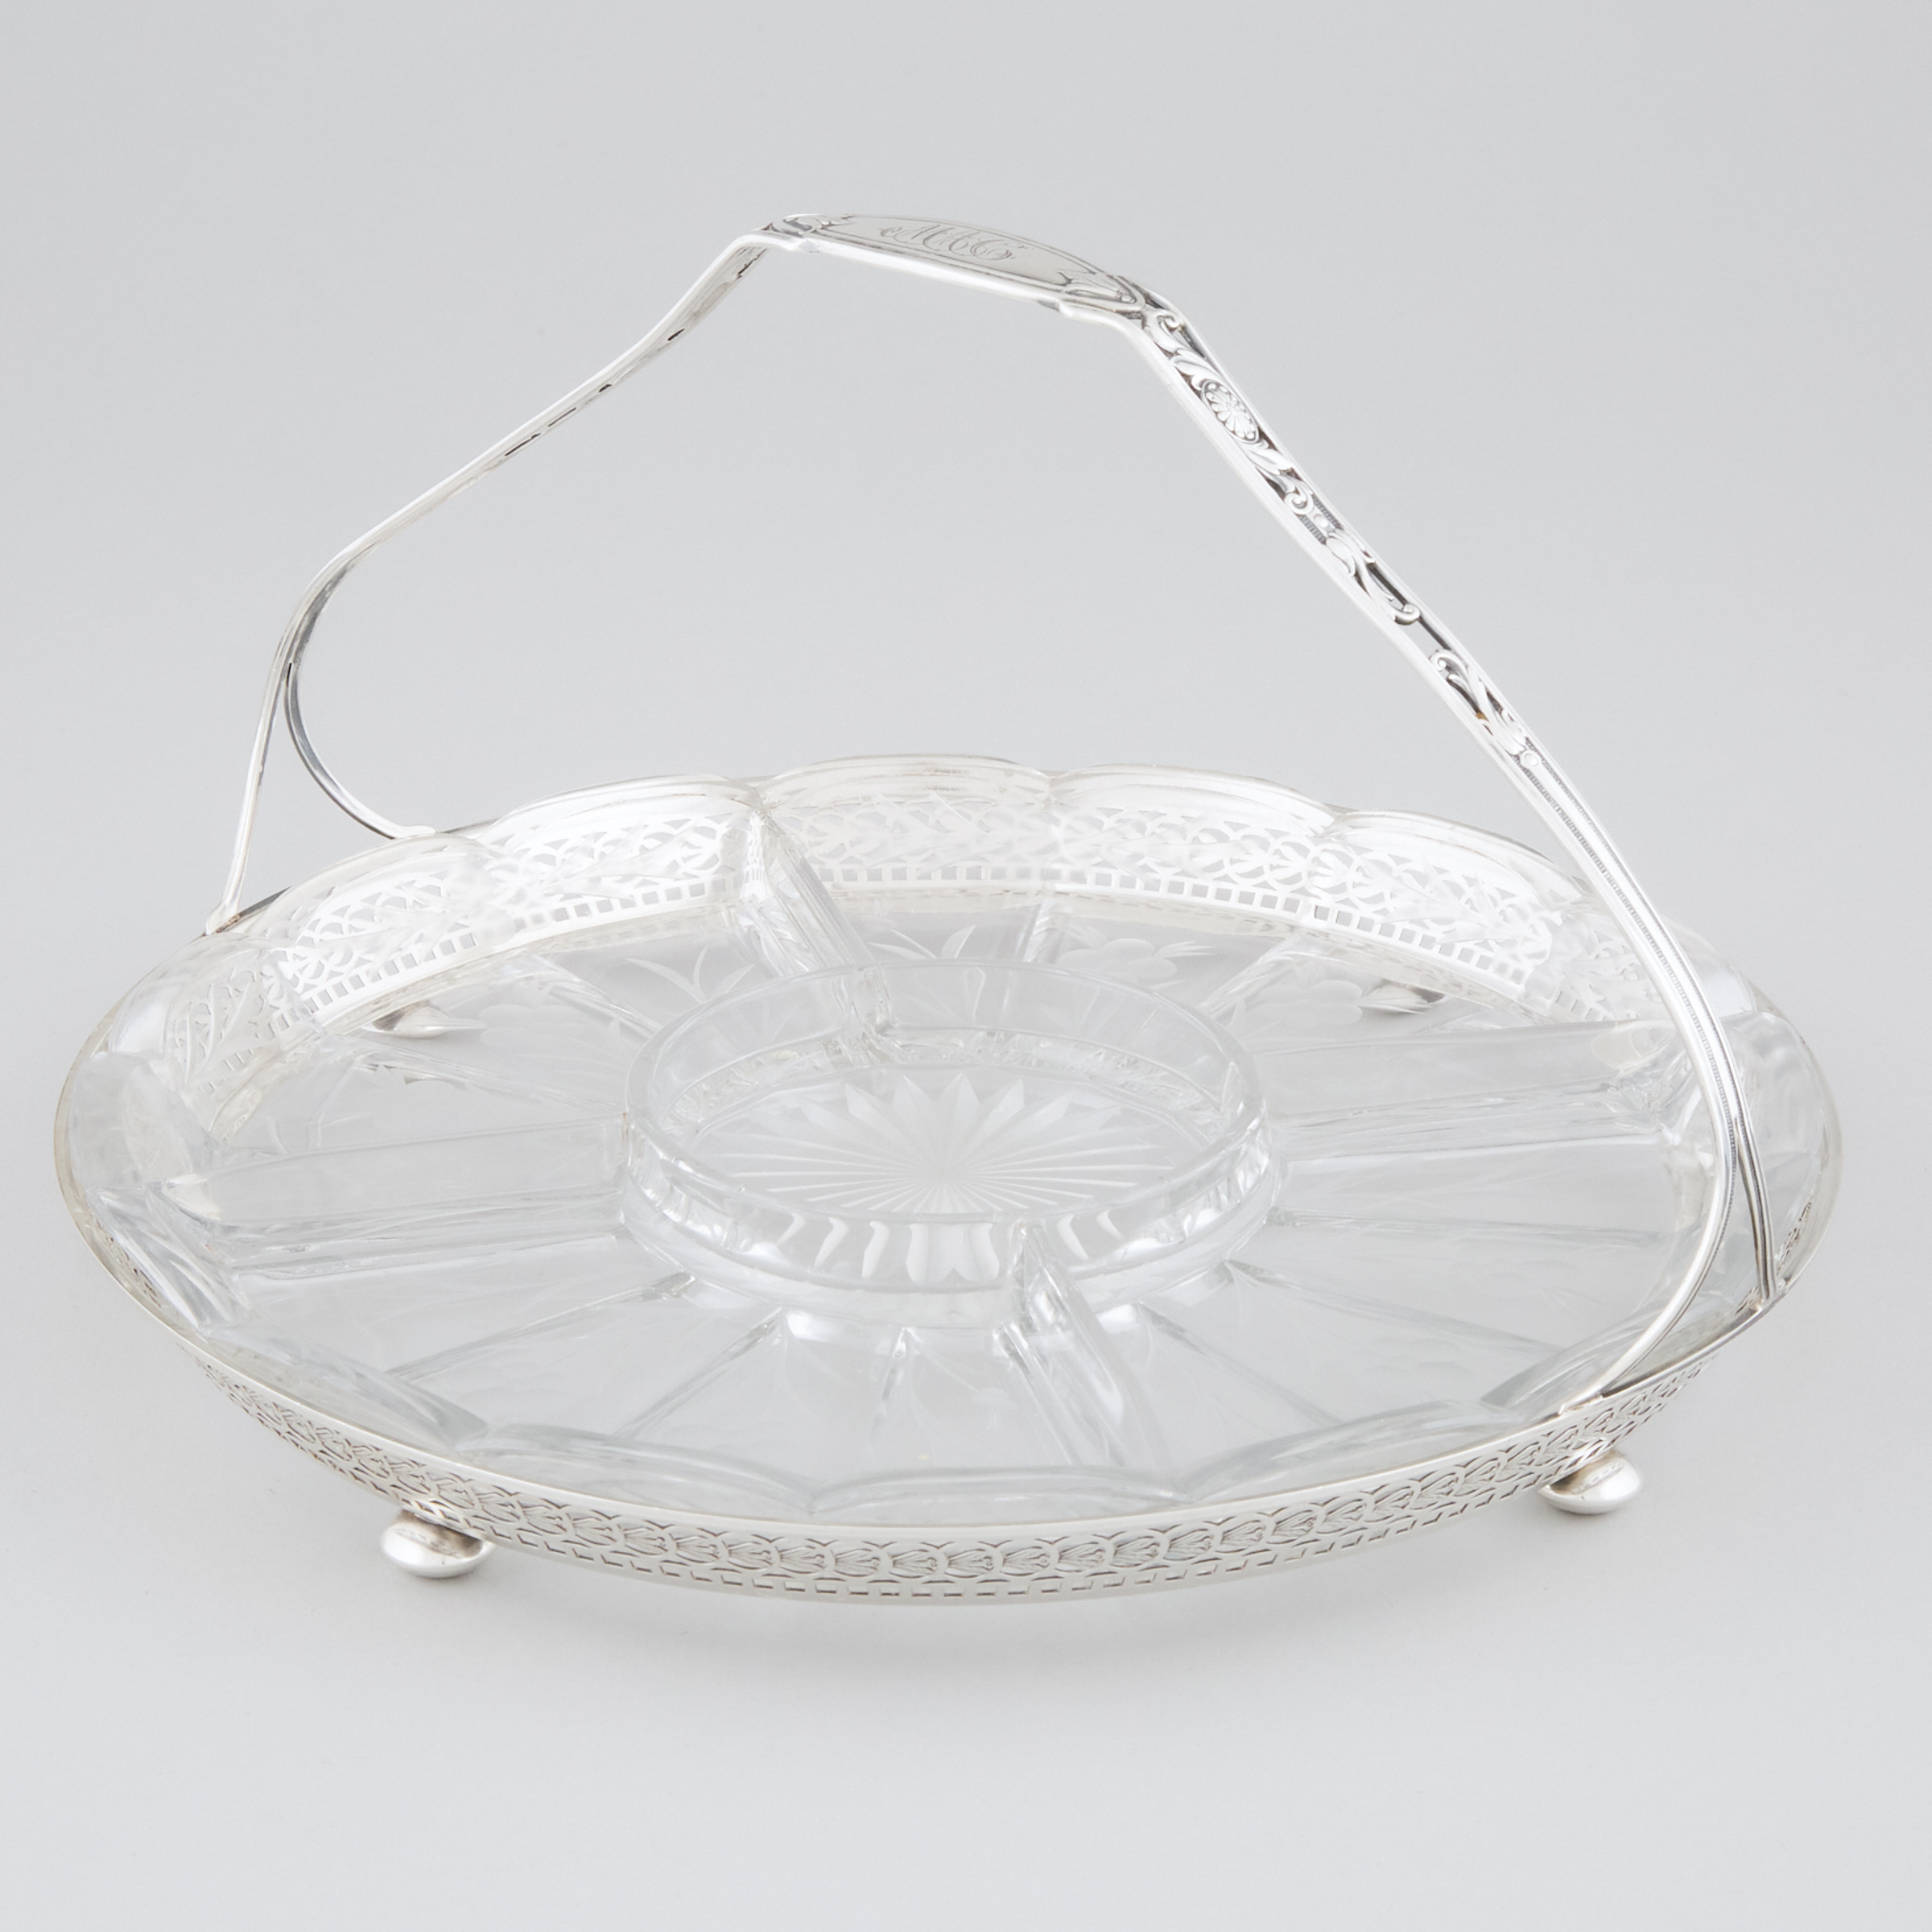 American Silver and Etched Glass Hors D'Oeuvres Basket, Watson Co., Attleboro, Mass., 20th century